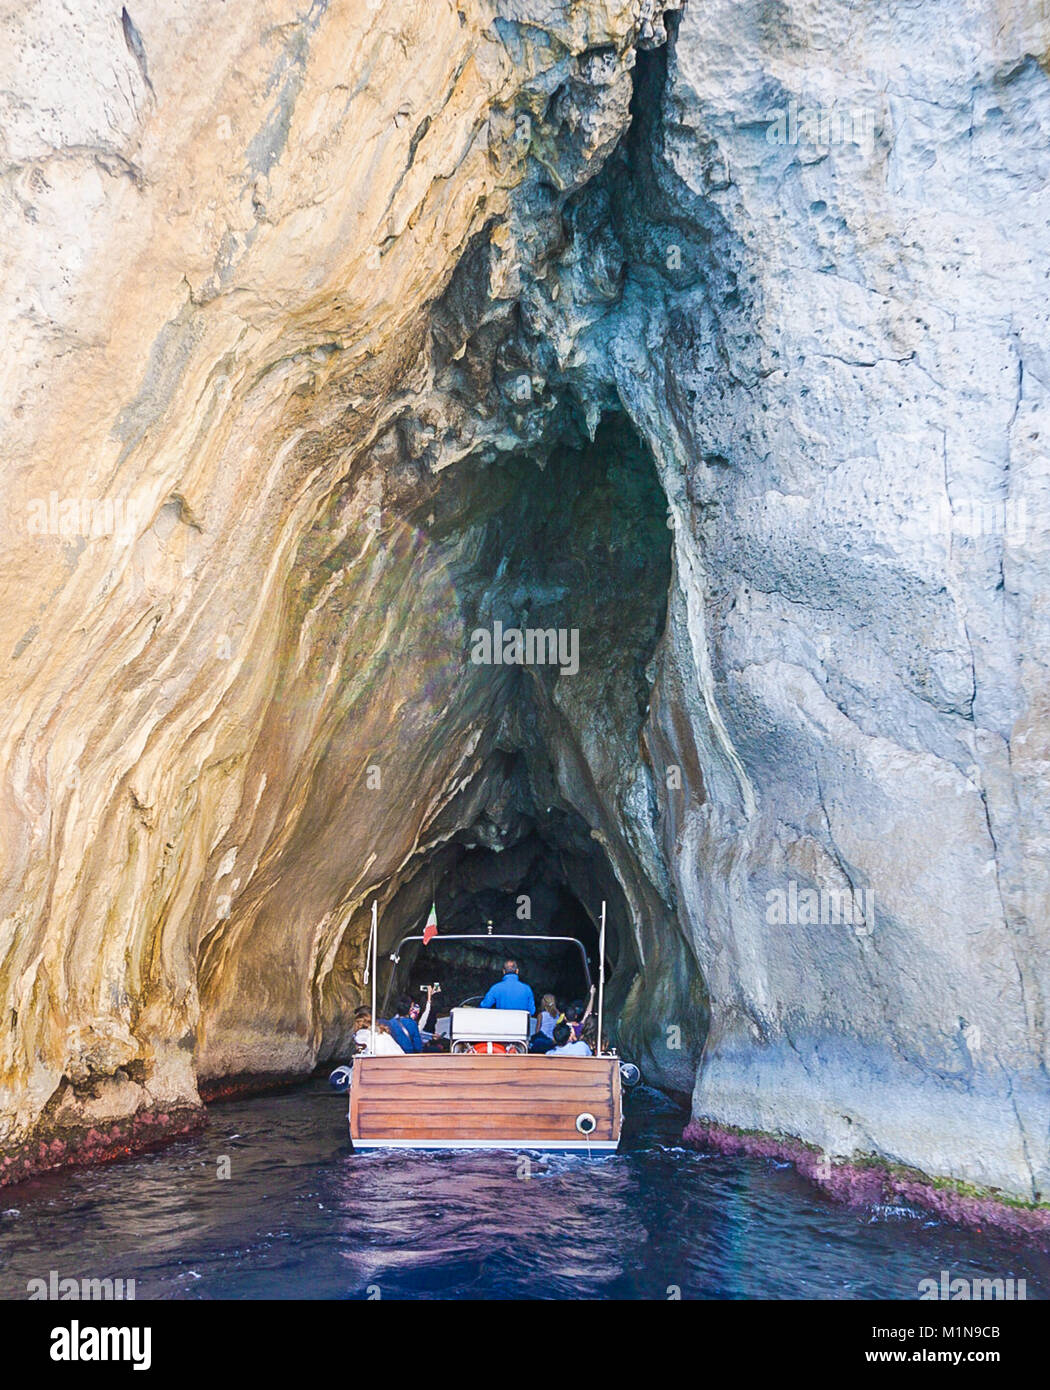 The Coral Grotto on the coast of the island of Capri, Italy. Stock Photo